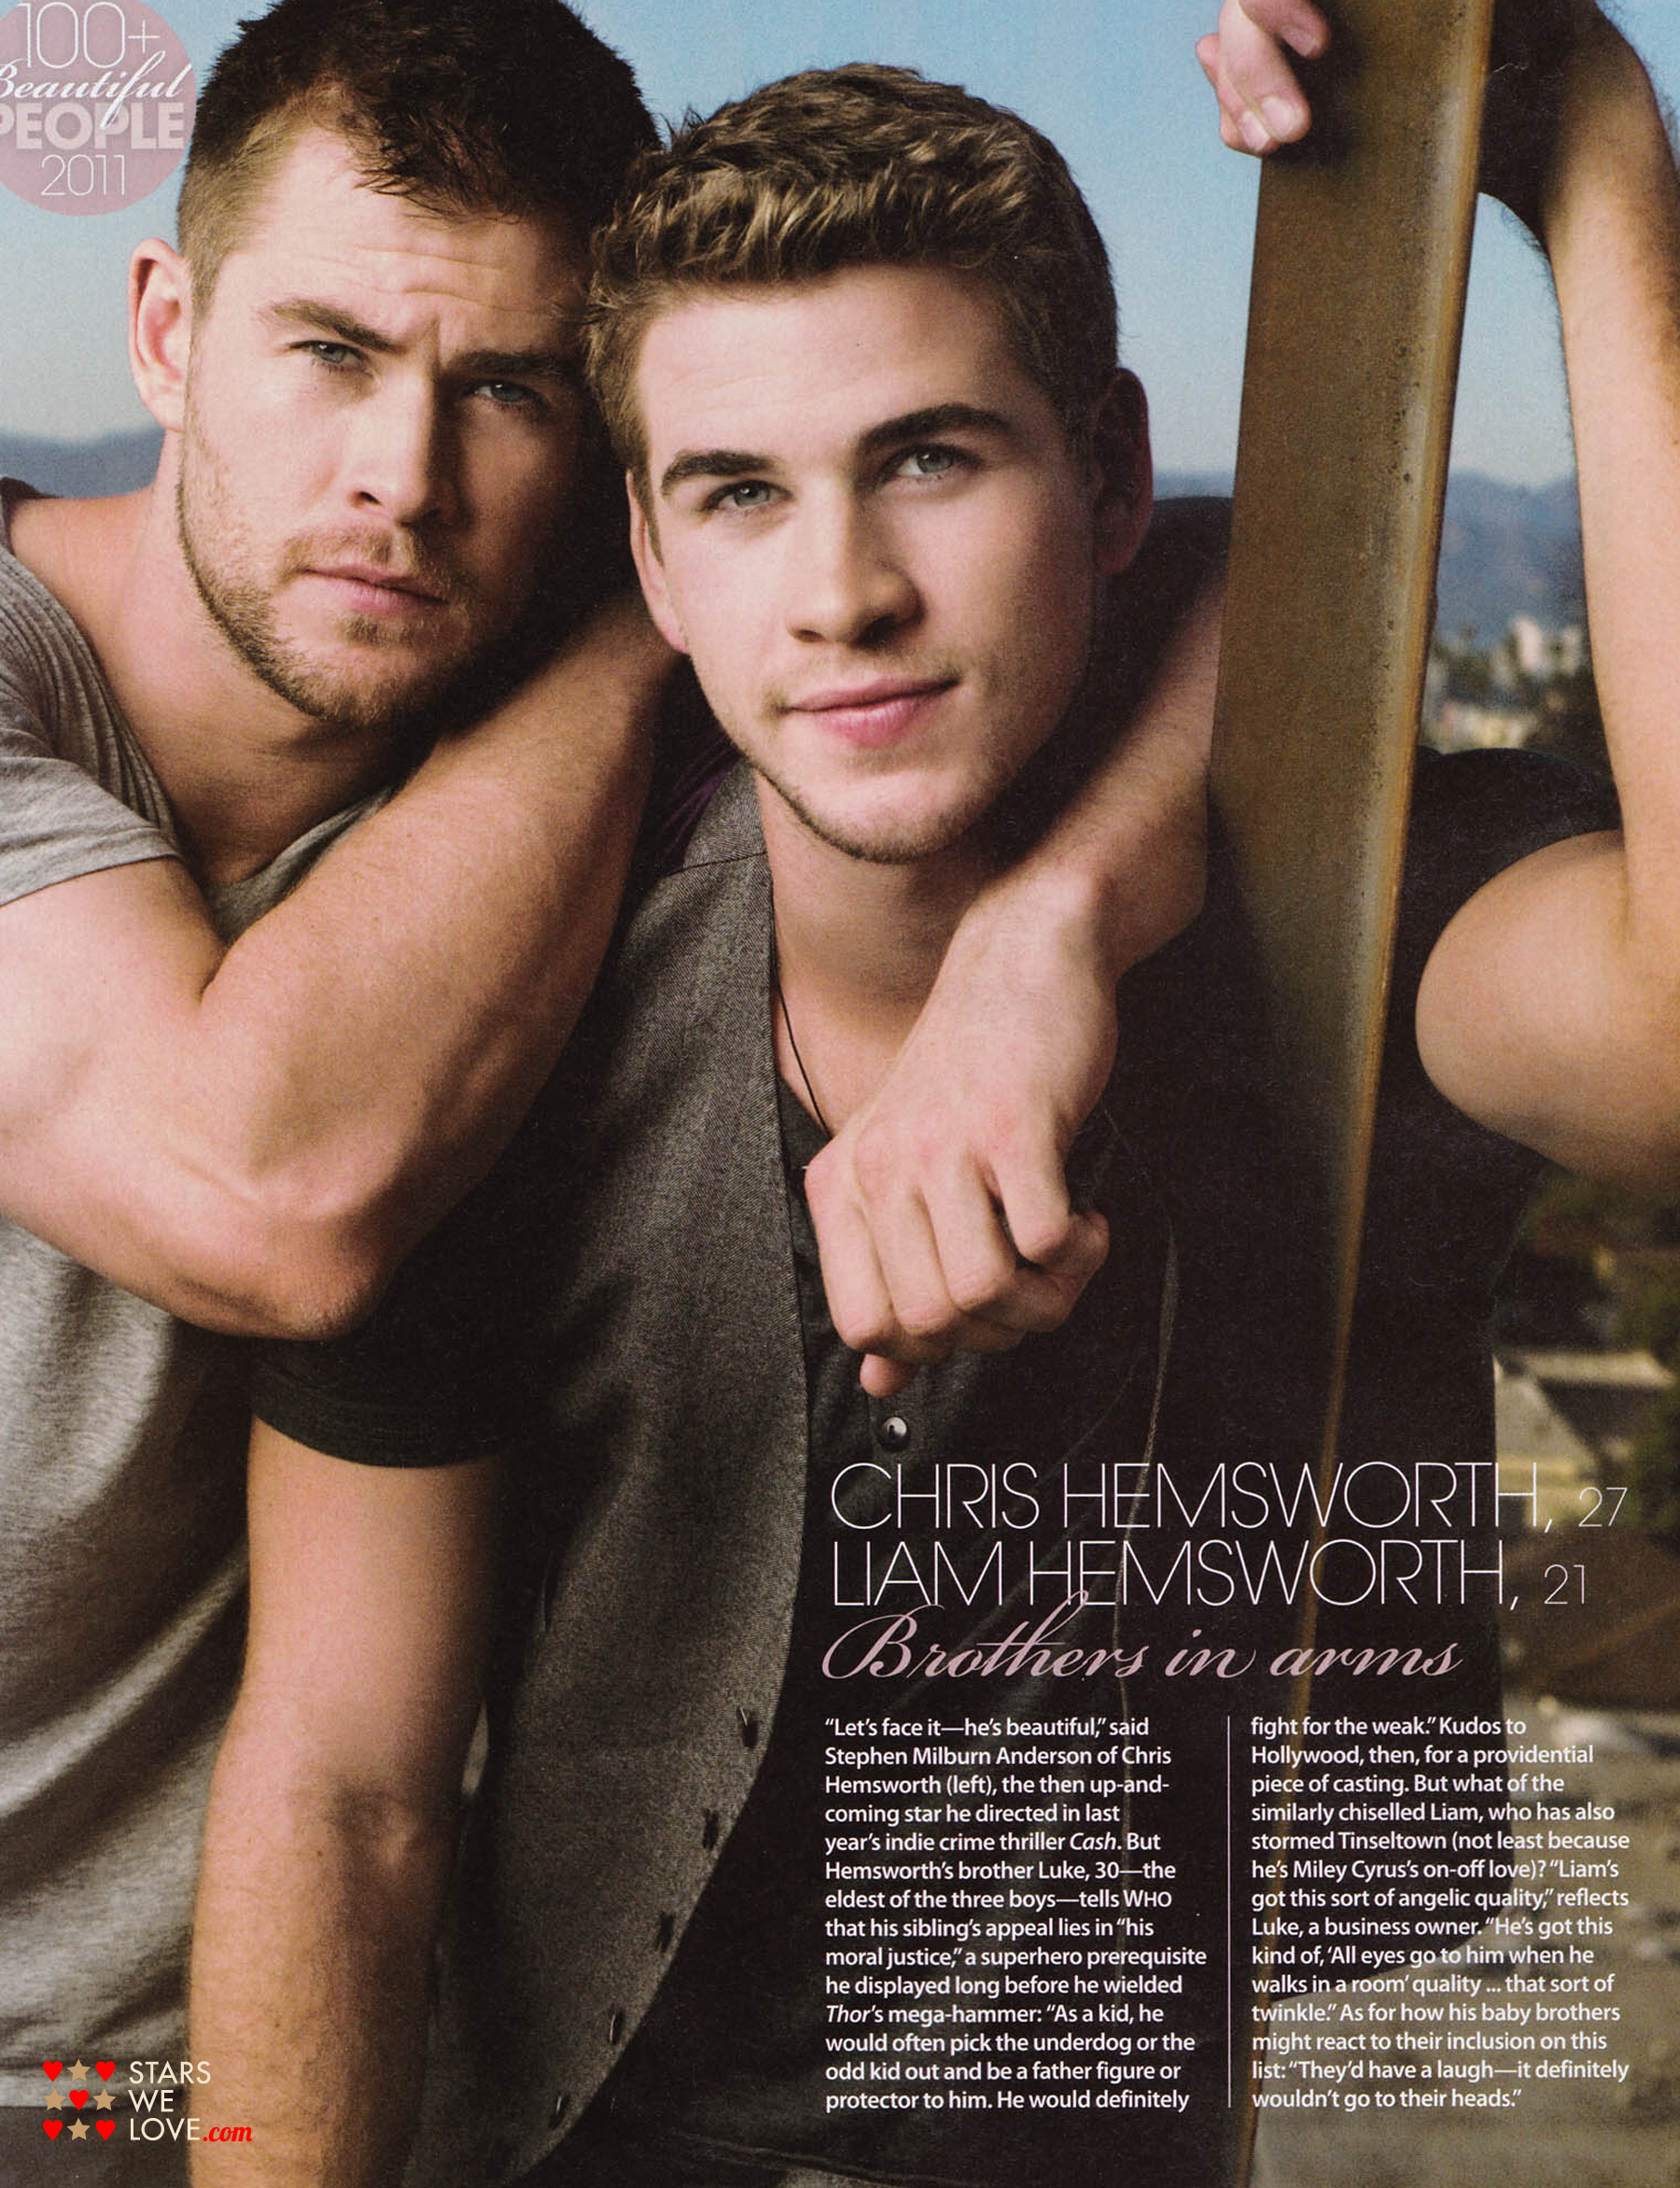 Liam Hemsworth And Chris HD Wallpaper Background Image